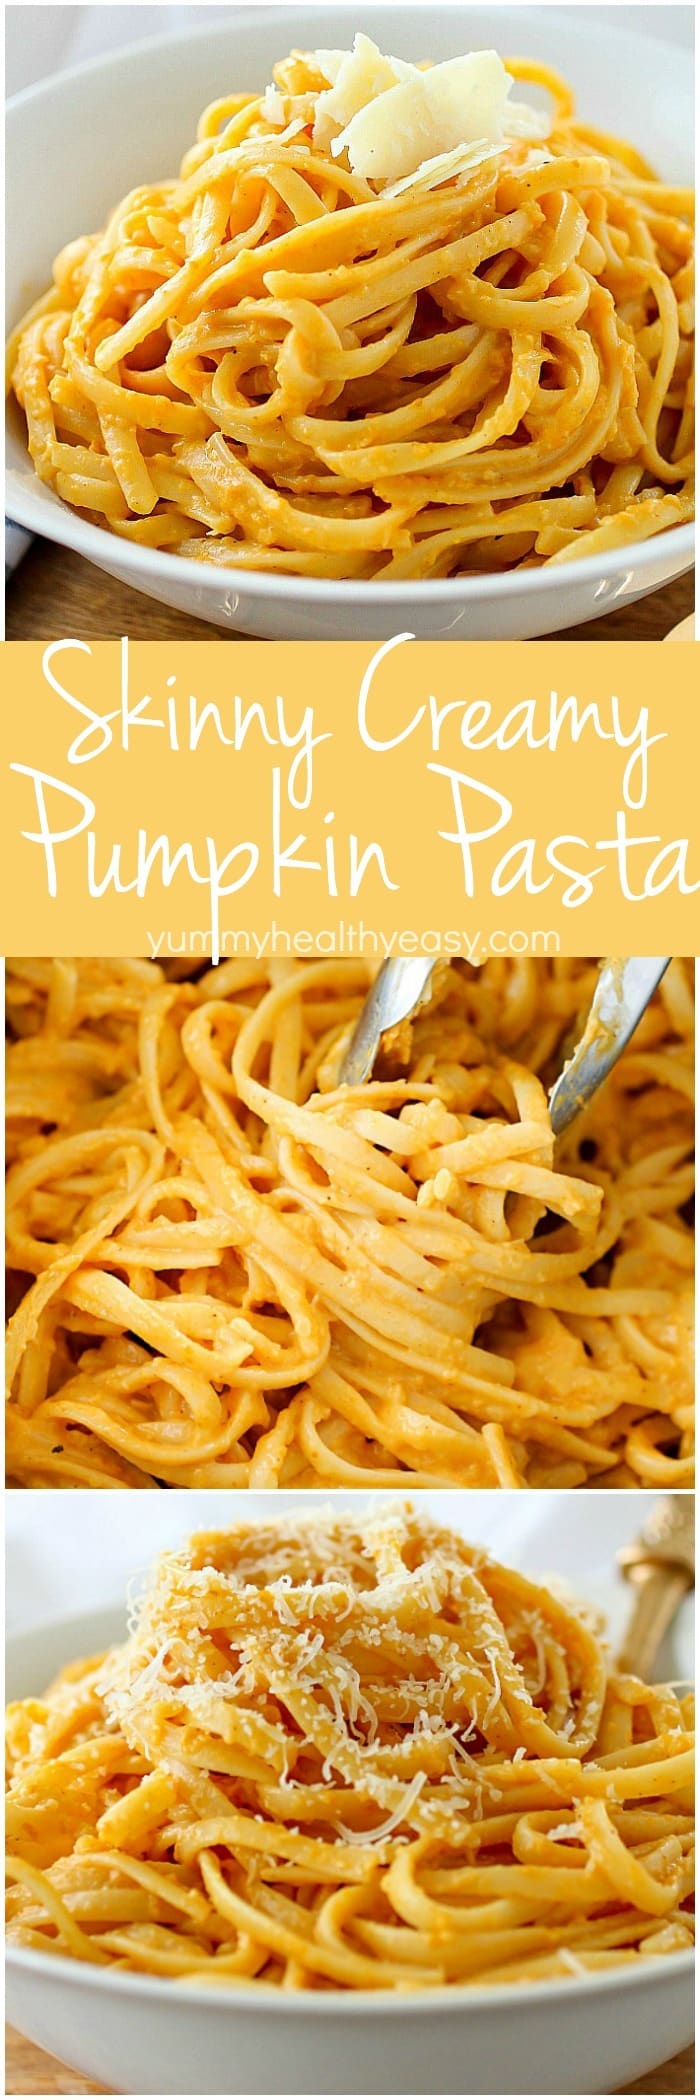 Creamy Pumpkin Pasta that's vegetarian, skinny and absolutely delicious! You won't believe the flavor pumpkin can add to a pasta sauce. This easy and healthier pasta sauce is great with any type of pasta or even zucchini noodles (zoodles)! Plus 22 more fabulous pasta recipes to celebrate National Pasta Day!